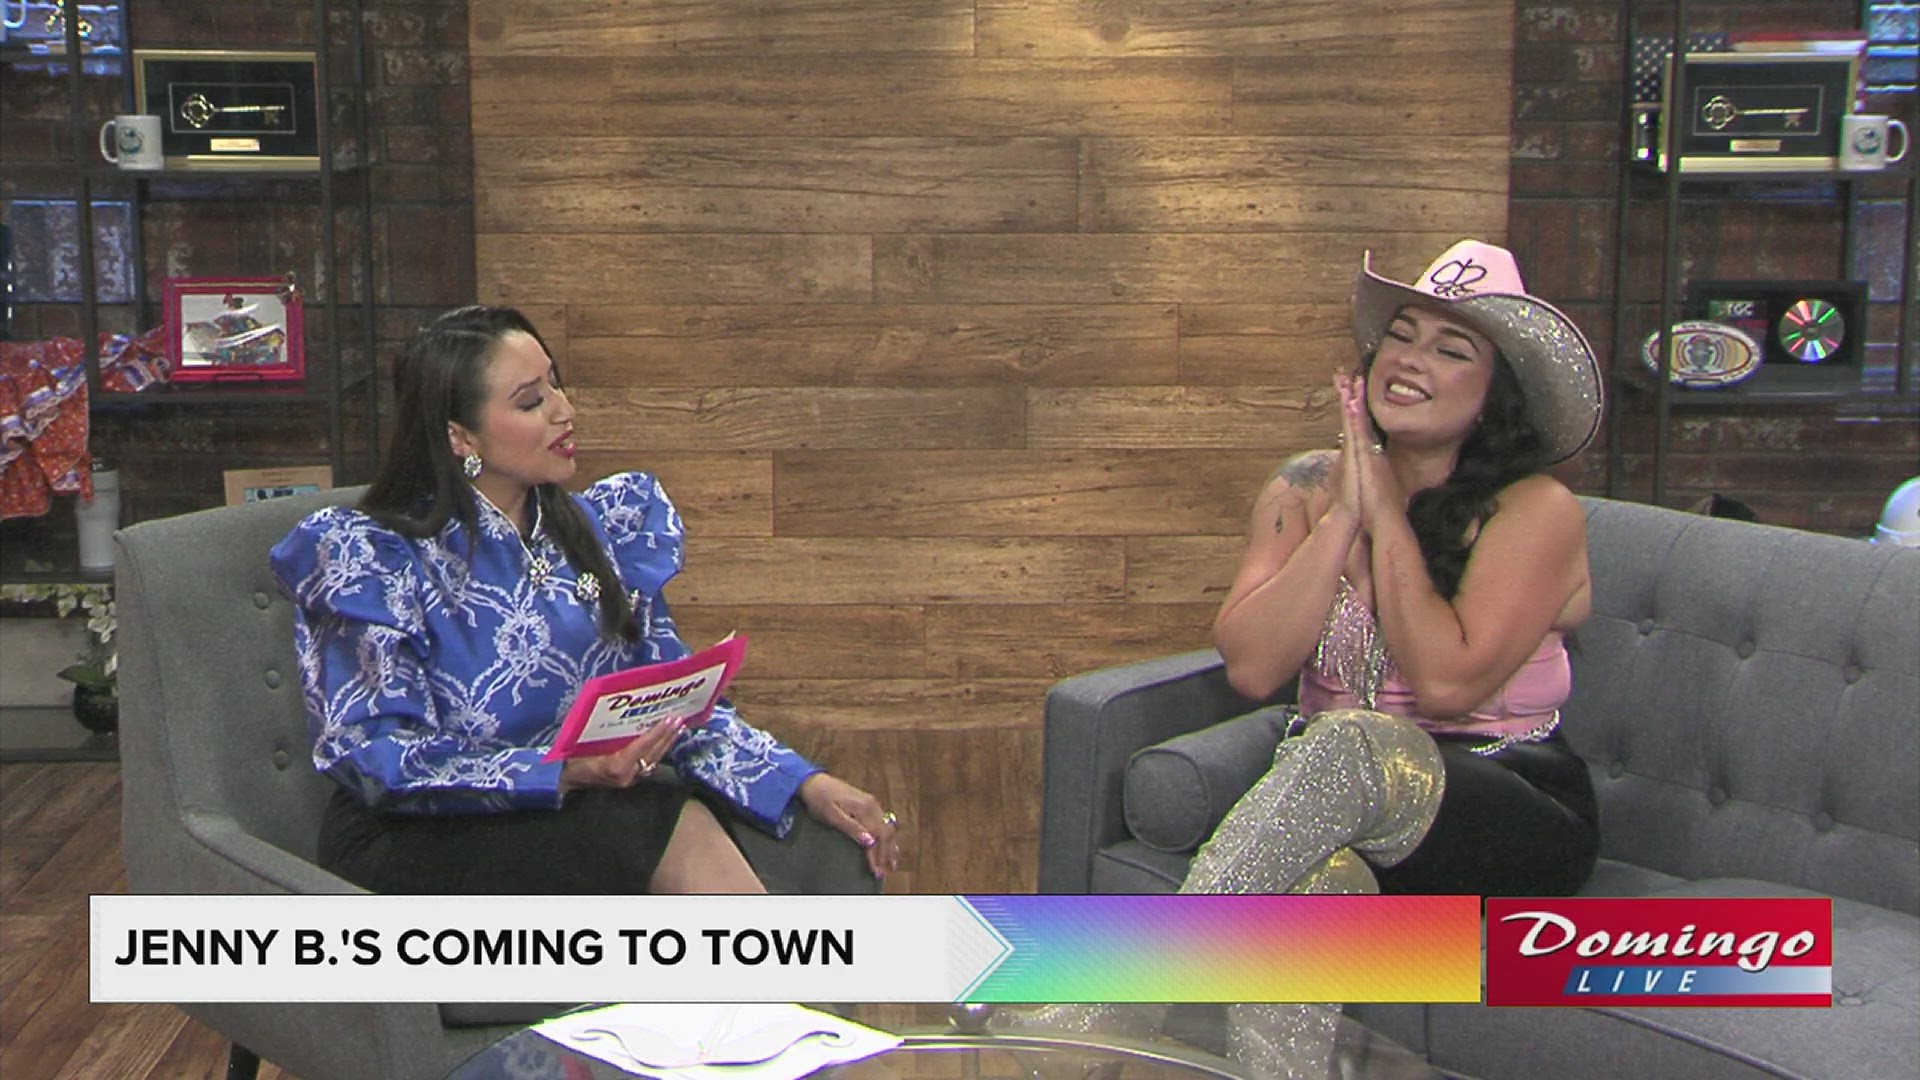 Jenny B. joined us on Domingo Live to discuss her start in Tejano, upcoming projects and what advice she has for girls following in her footsteps.